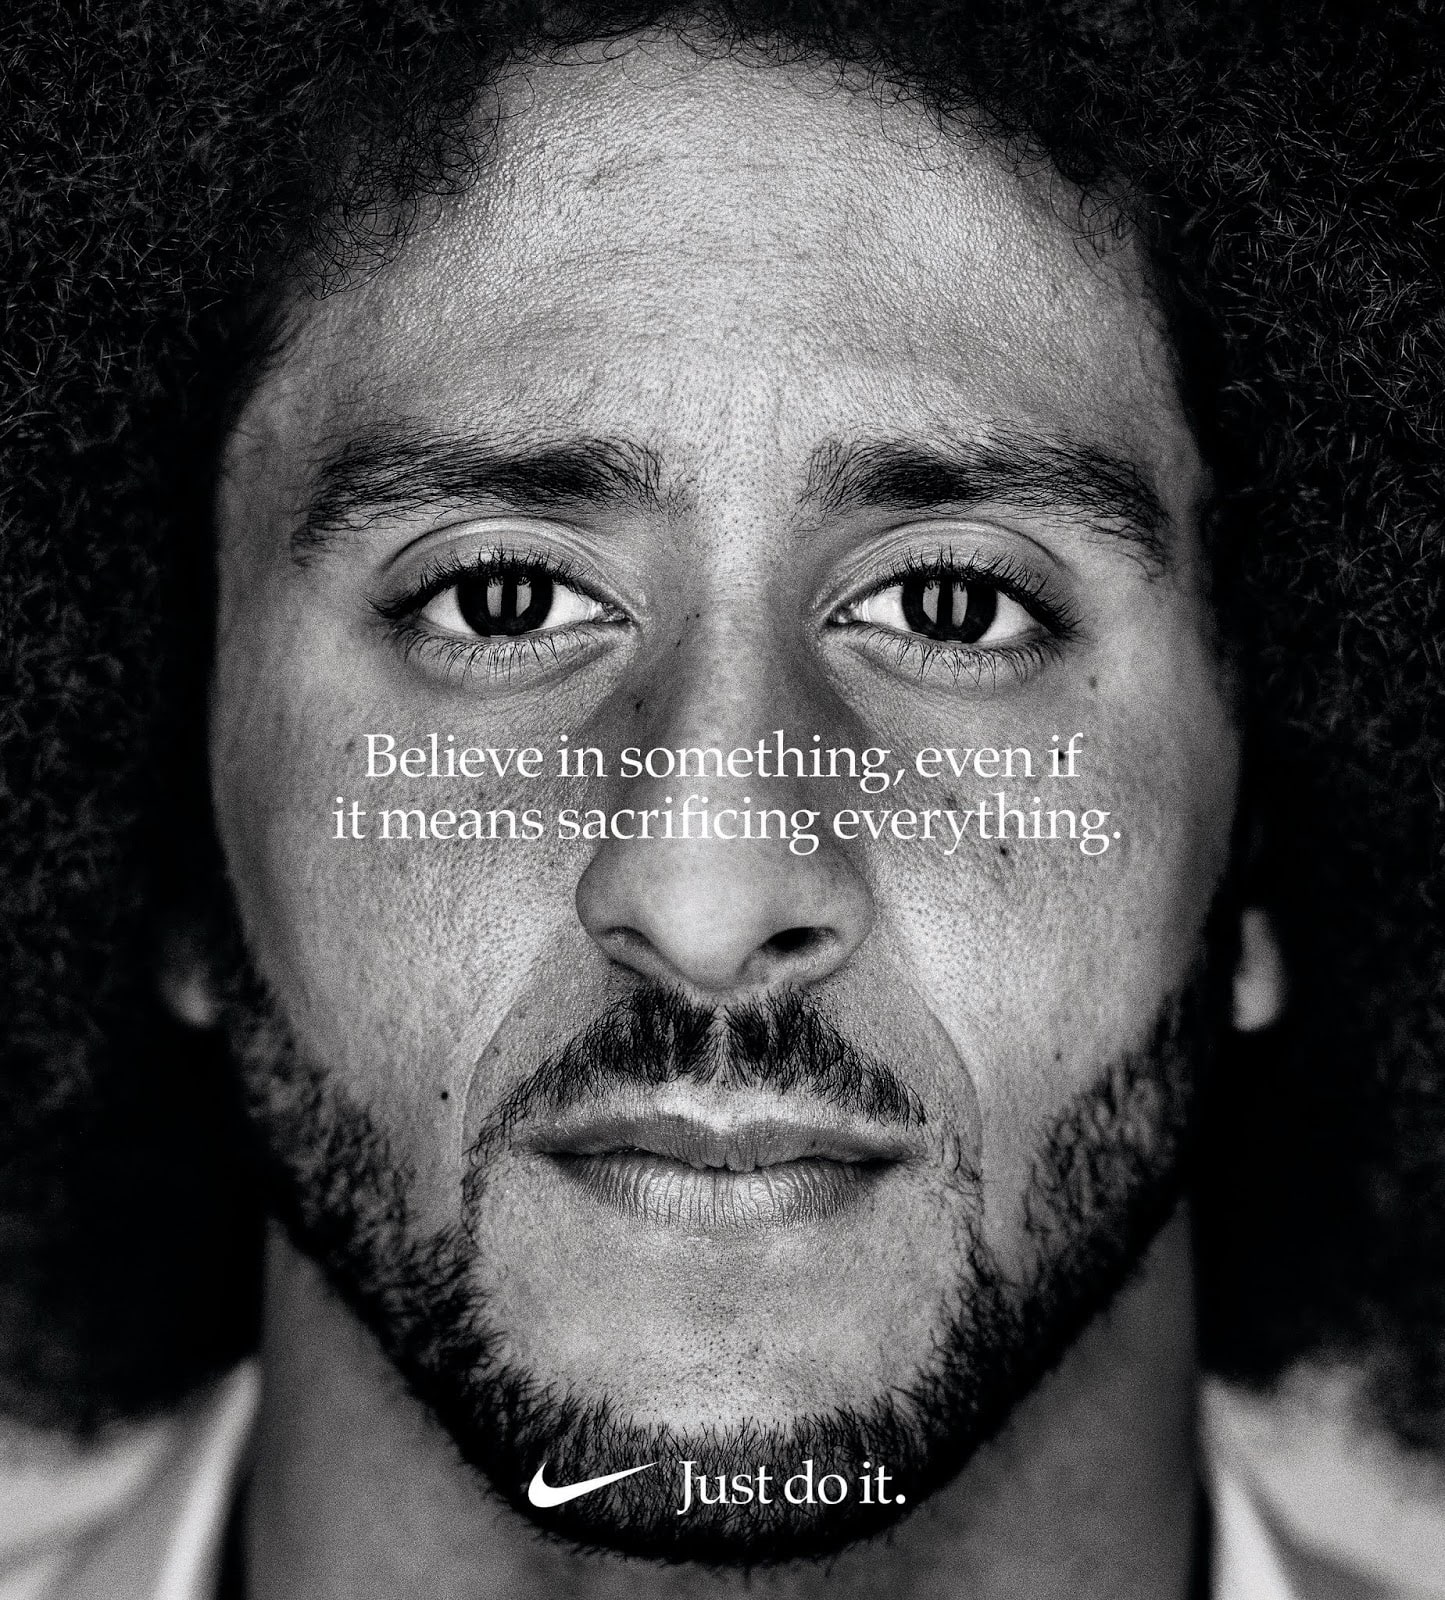 Believe in something even if it means sacrificing everything - Nike